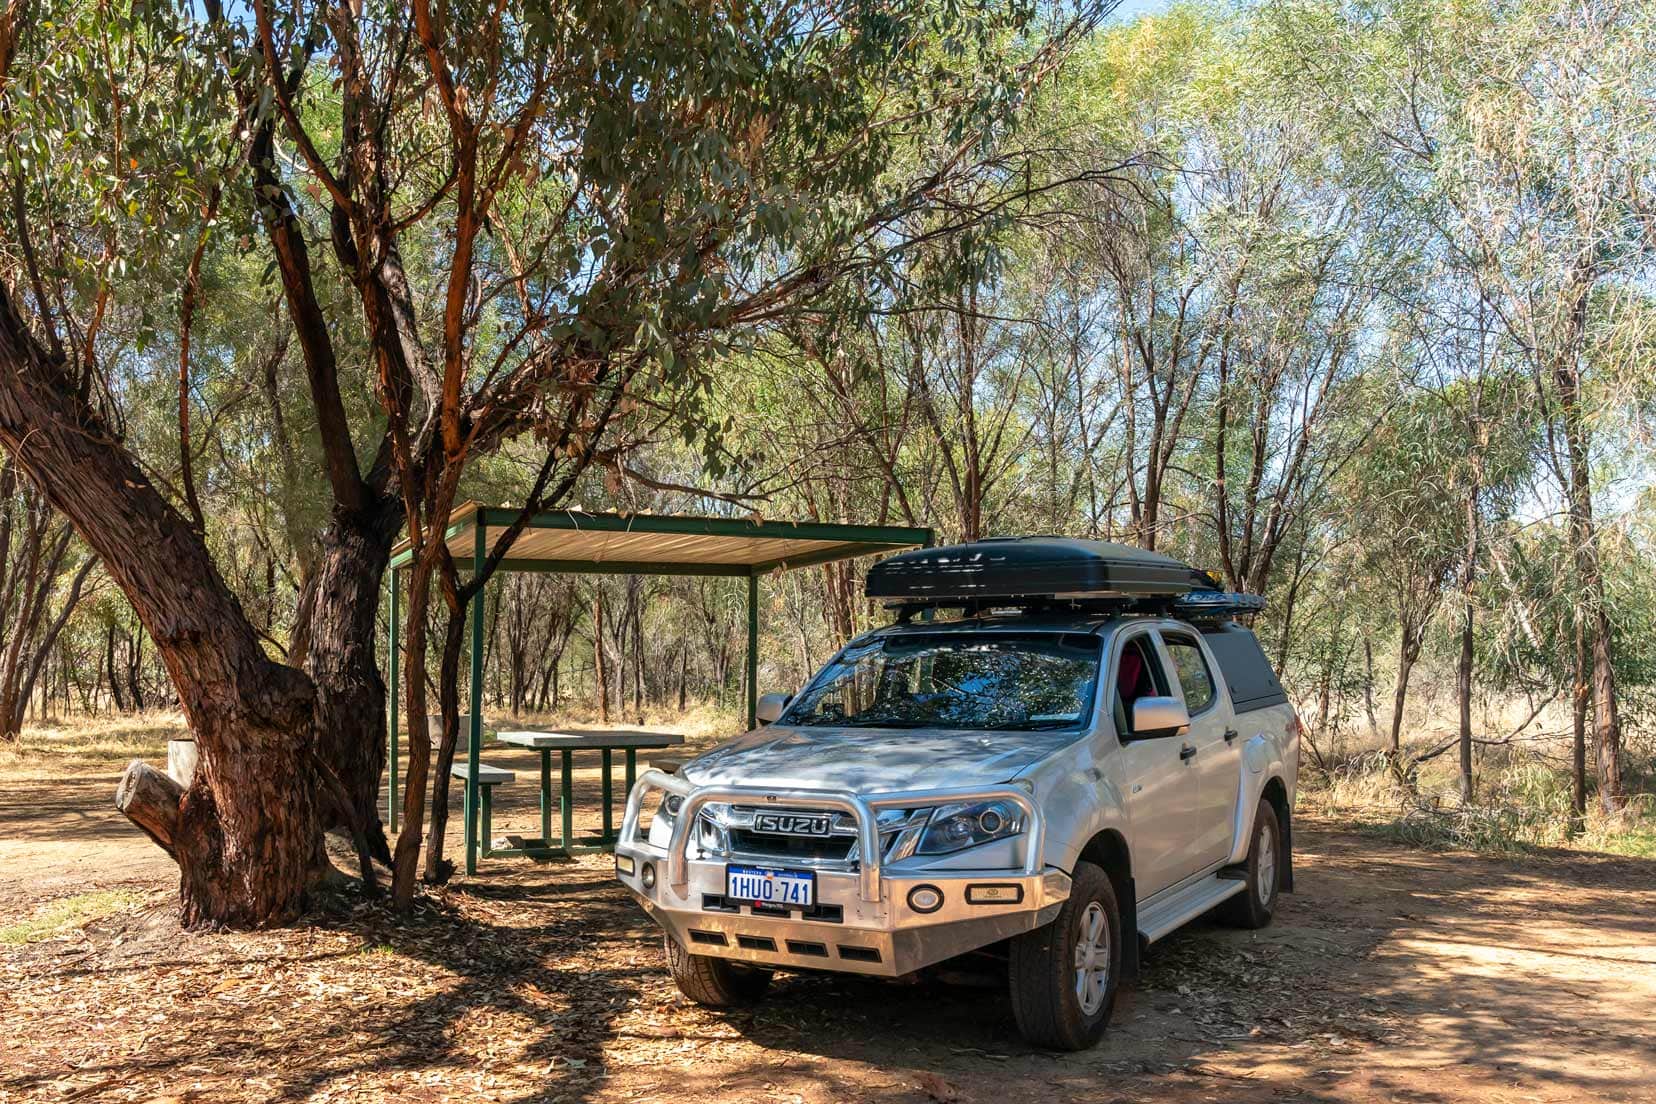 Quairading---Toapin-Weir our Isuzu Dmax parked in the camping spot with trees and a shelter behind